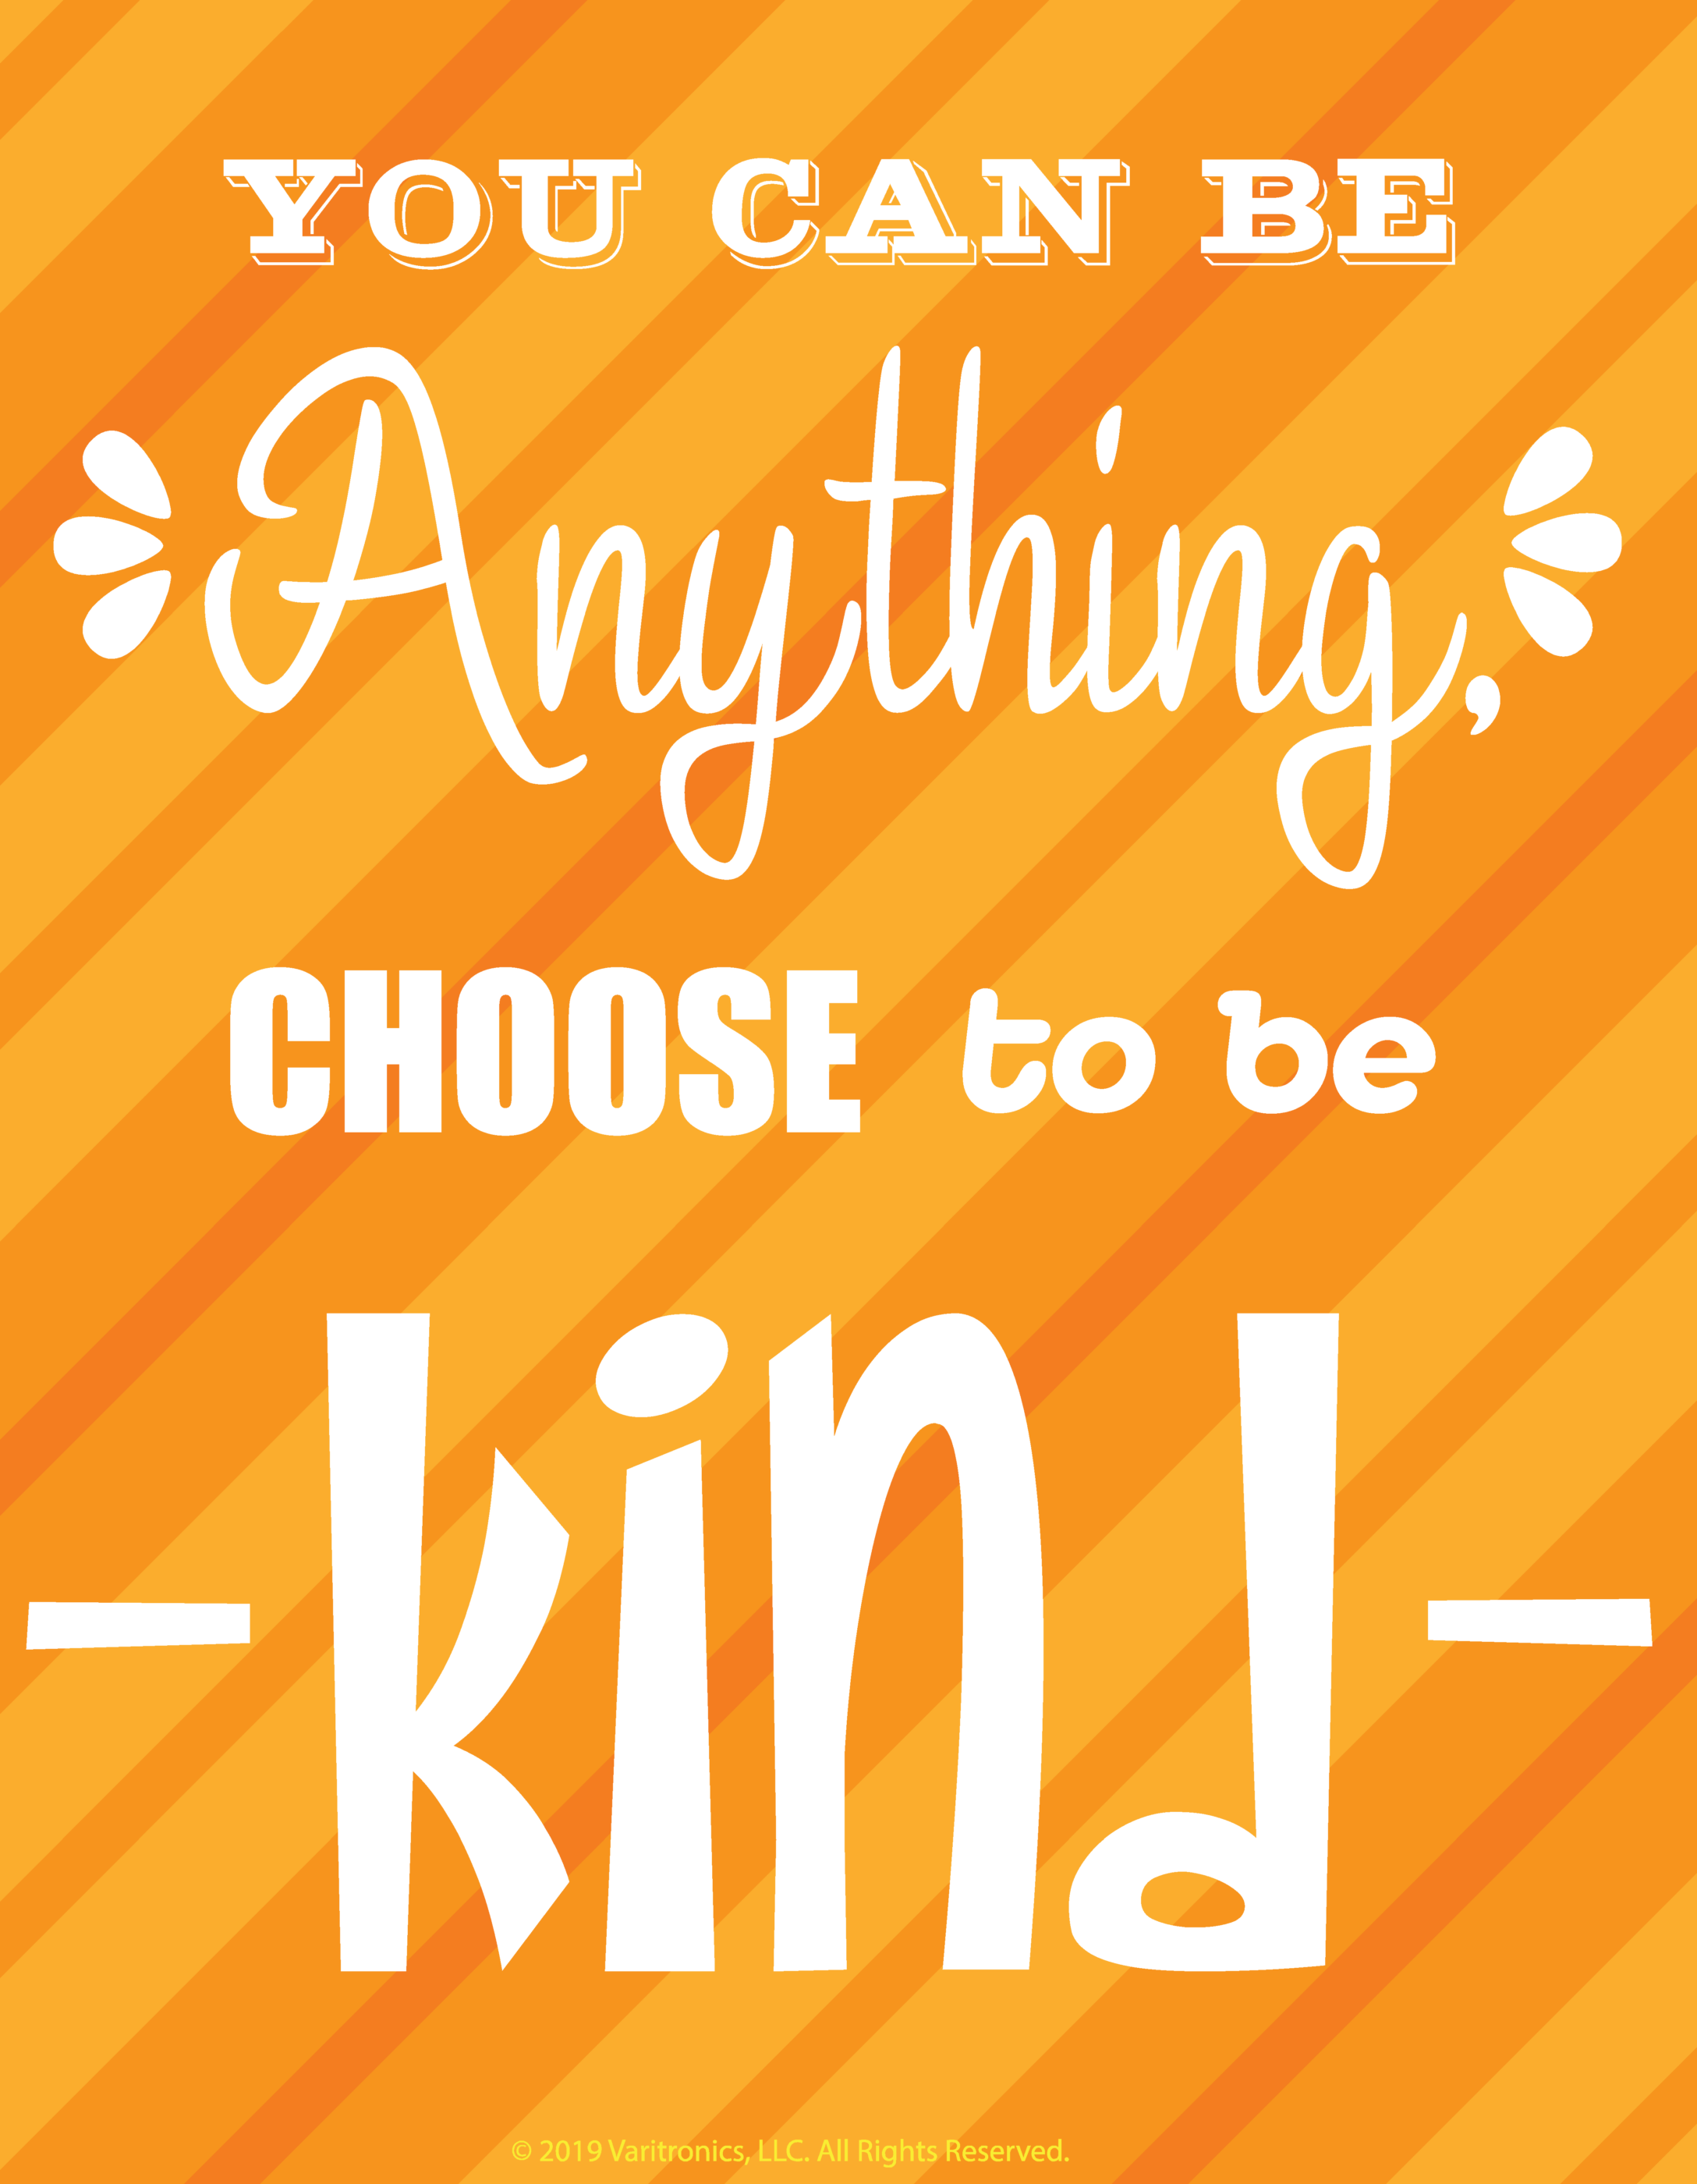 VariQuest perfecta output be kind poster